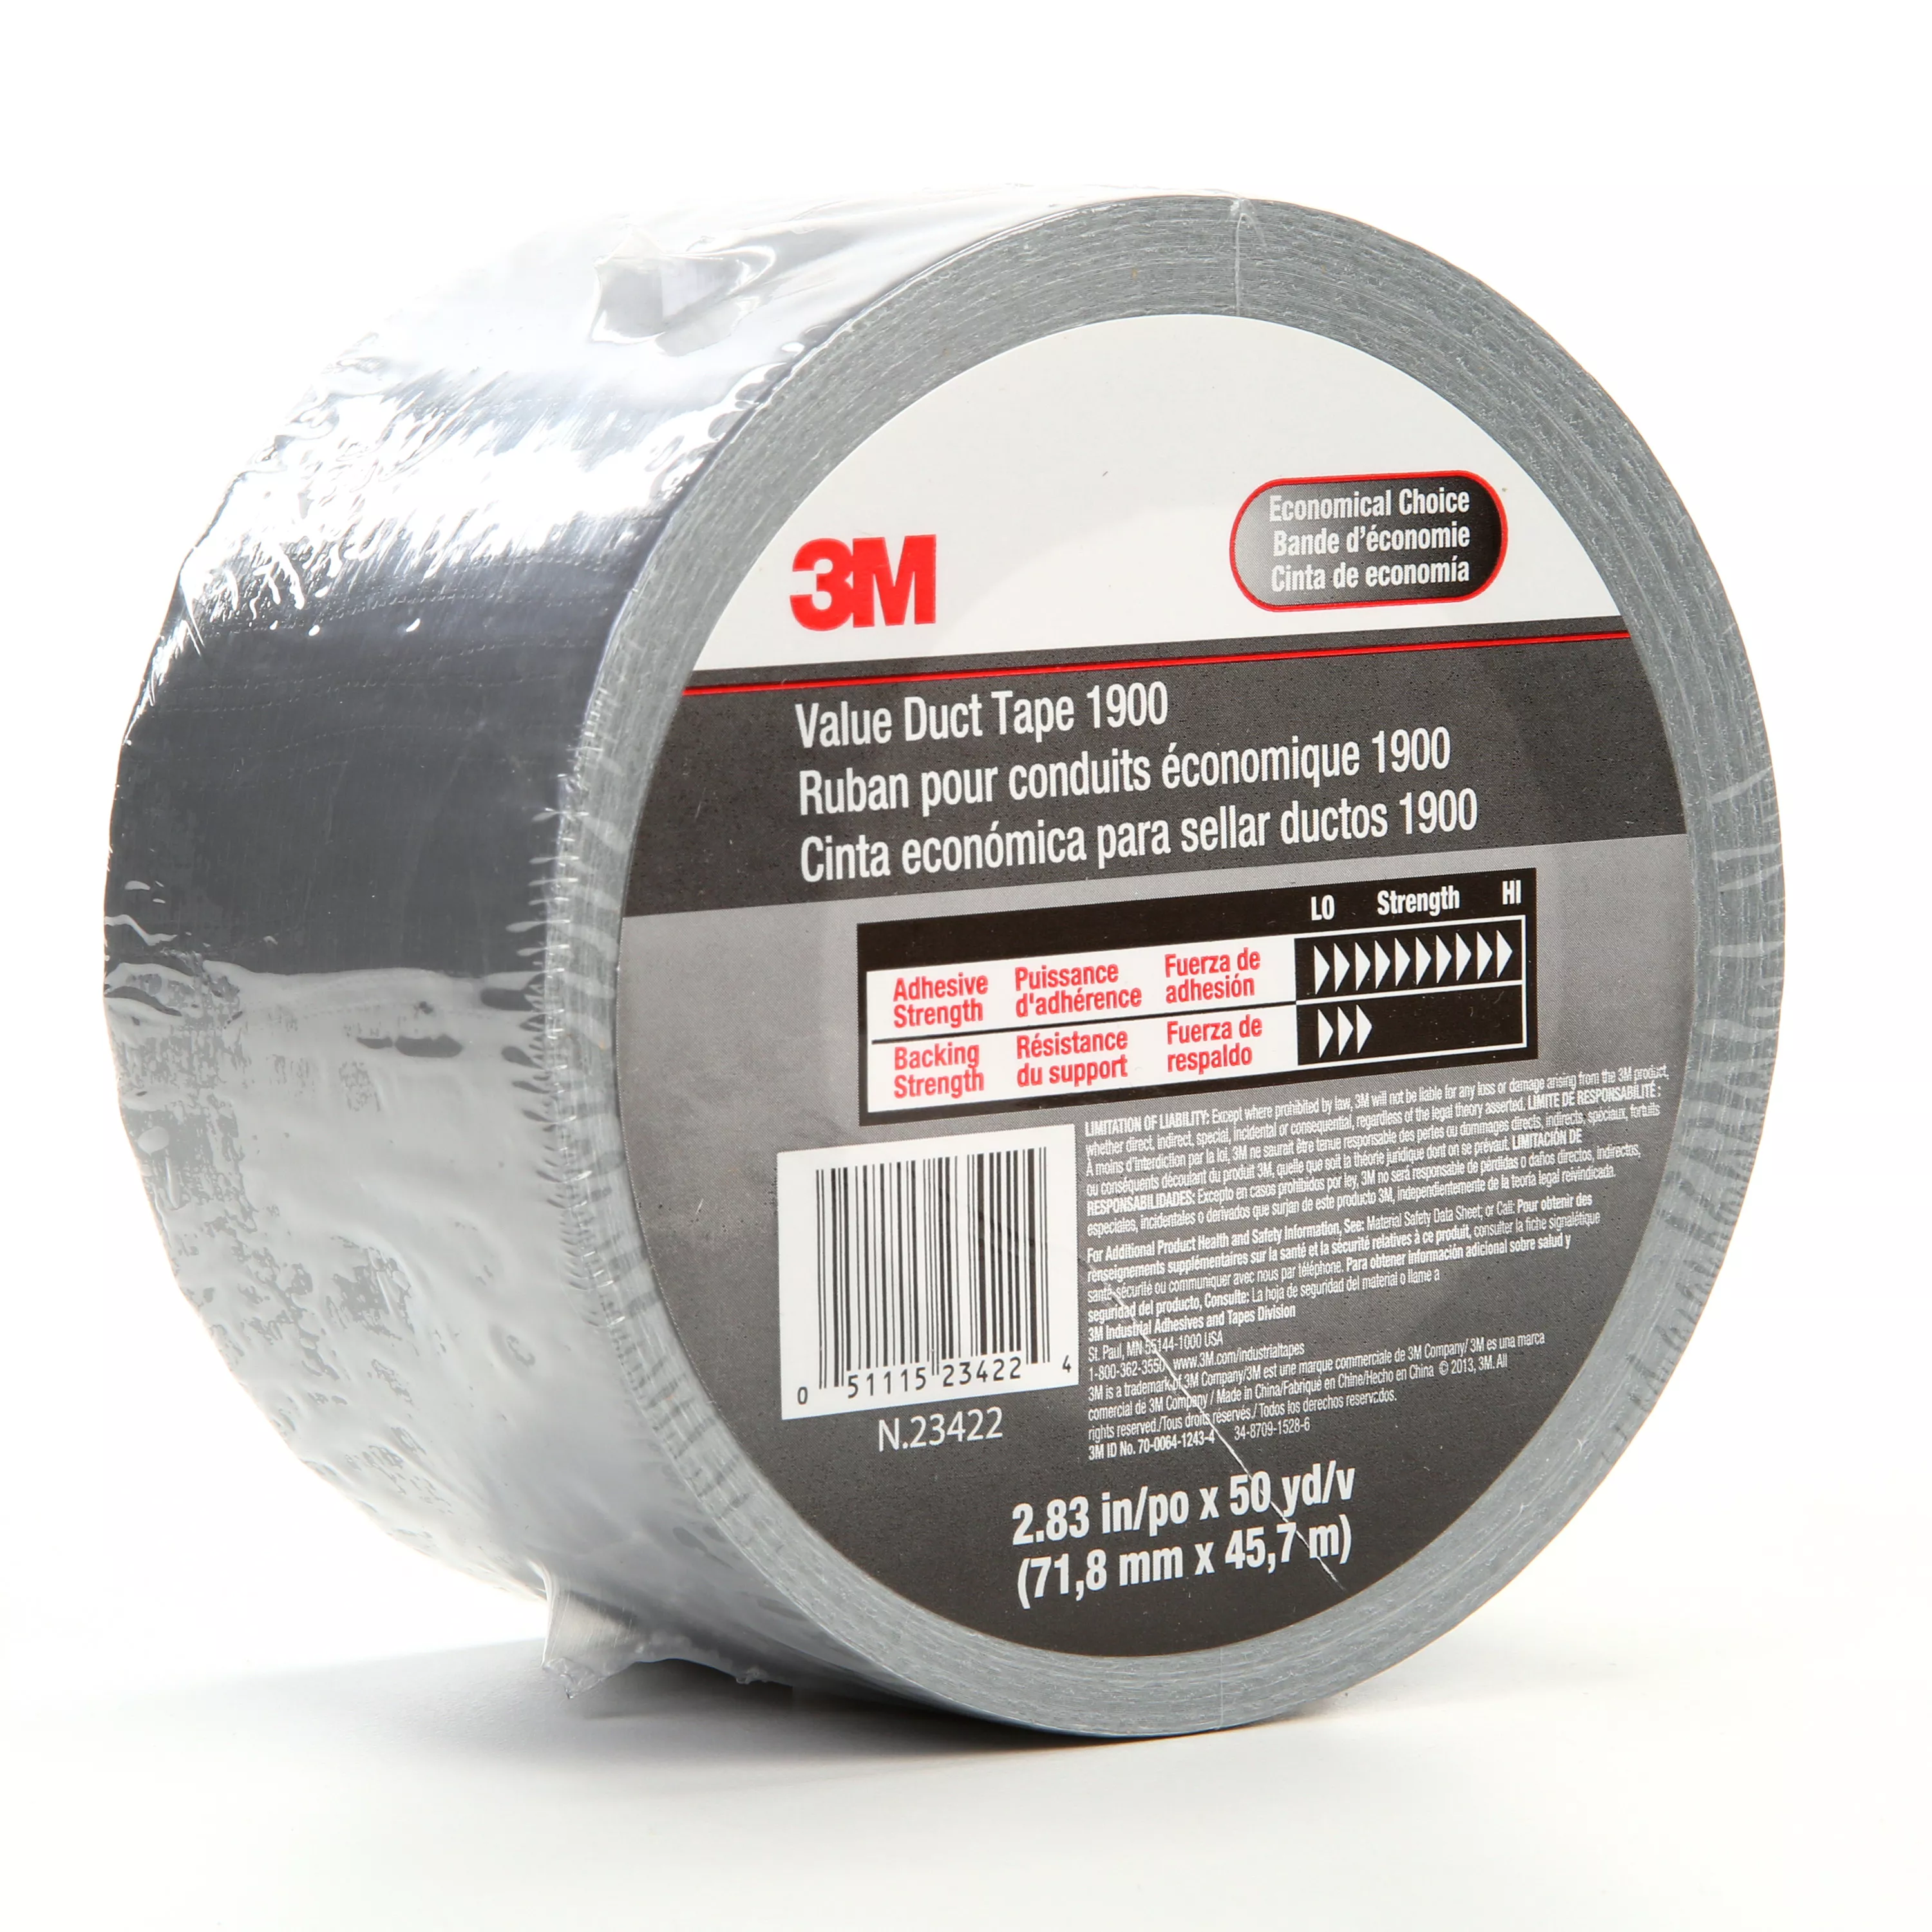 3M™ Value Duct Tape 1900, Silver, 2.83 in x 50 yd, 5.8 mil, 12/Case,
Individually Wrapped Conveniently Packaged